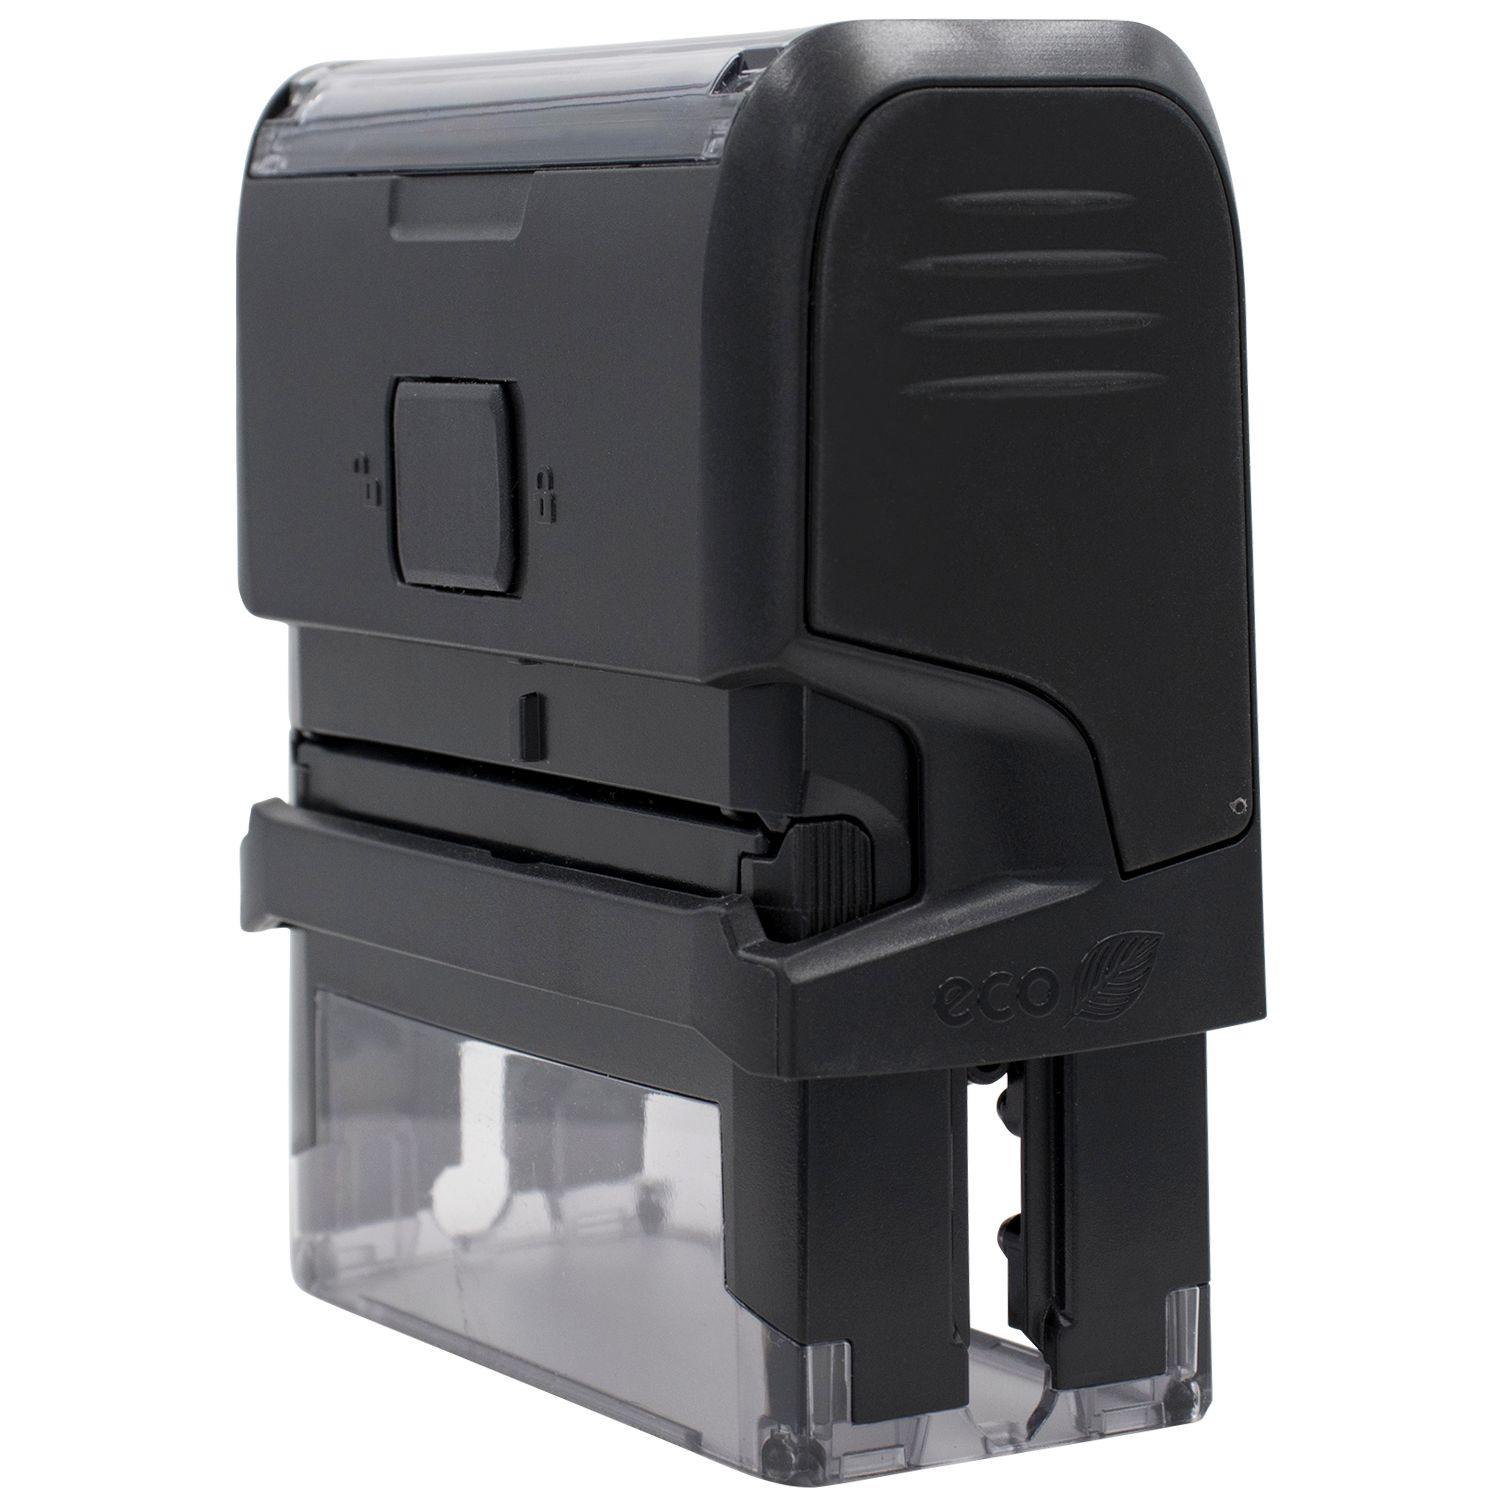 Self Inking Way To Go Stamp - Engineer Seal Stamps - Brand_Trodat, Impression Size_Small, Stamp Type_Self-Inking Stamp, Type of Use_Teacher